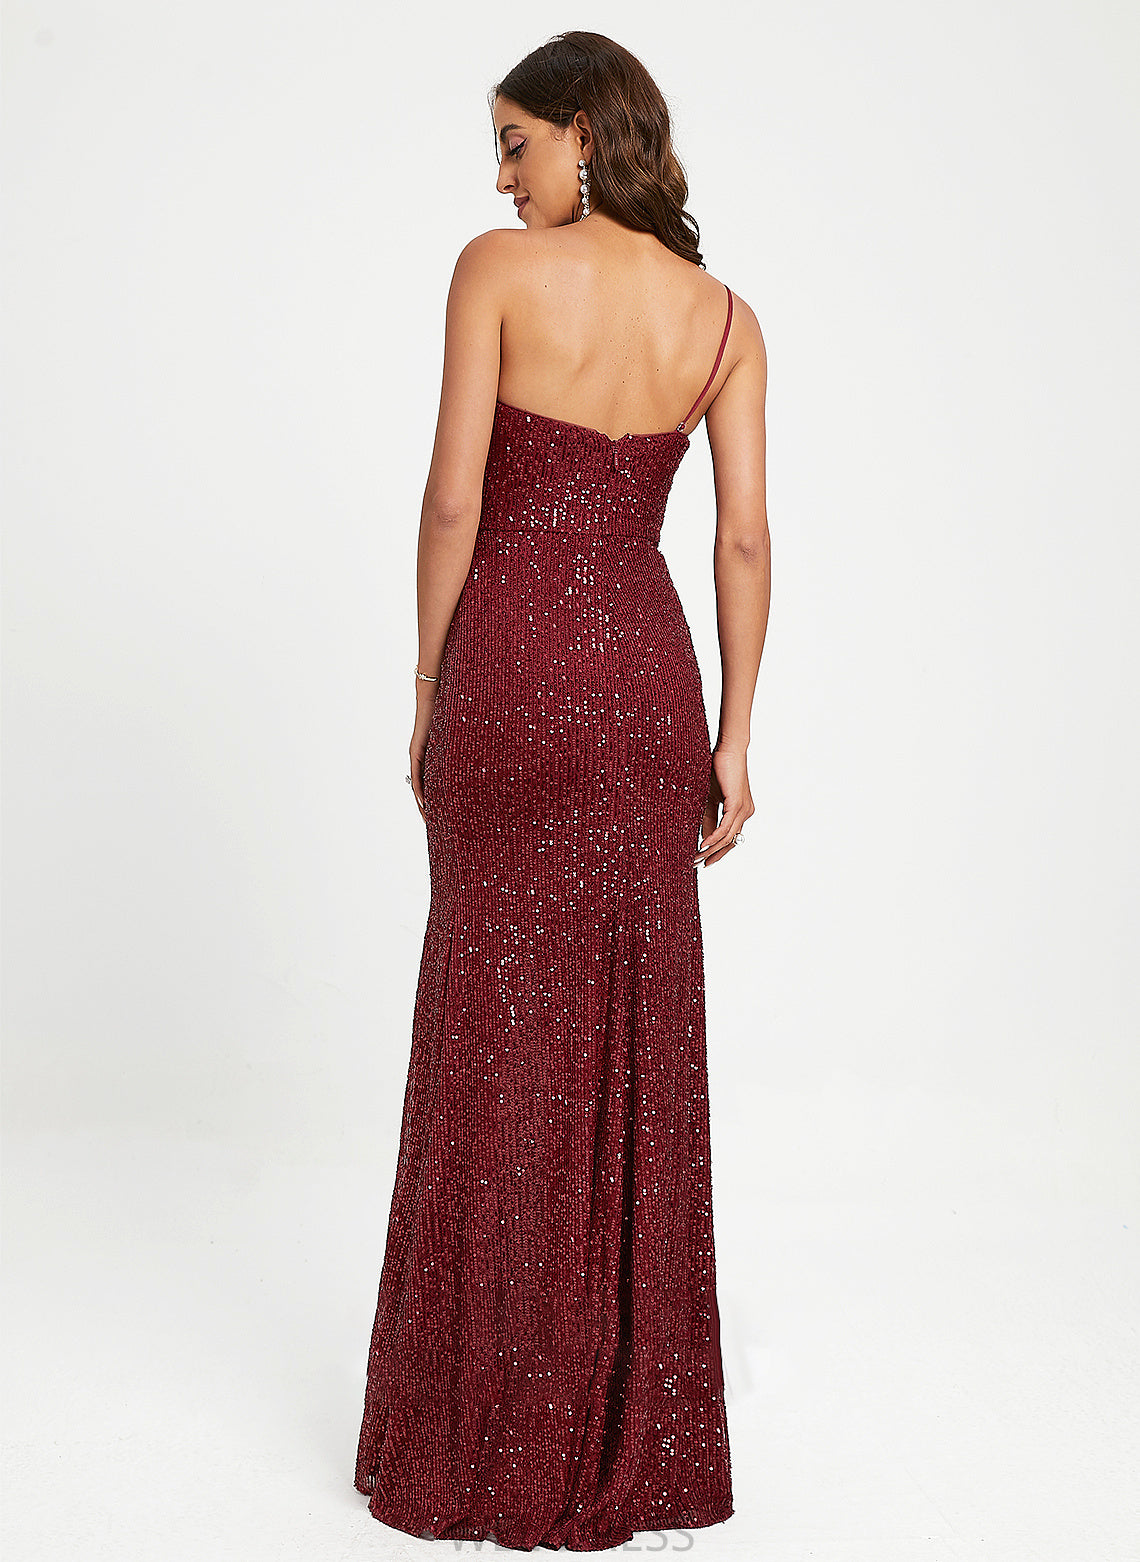 Jessica Sequins Prom Dresses Floor-Length Sheath/Column With Sequined One-Shoulder Ruffle